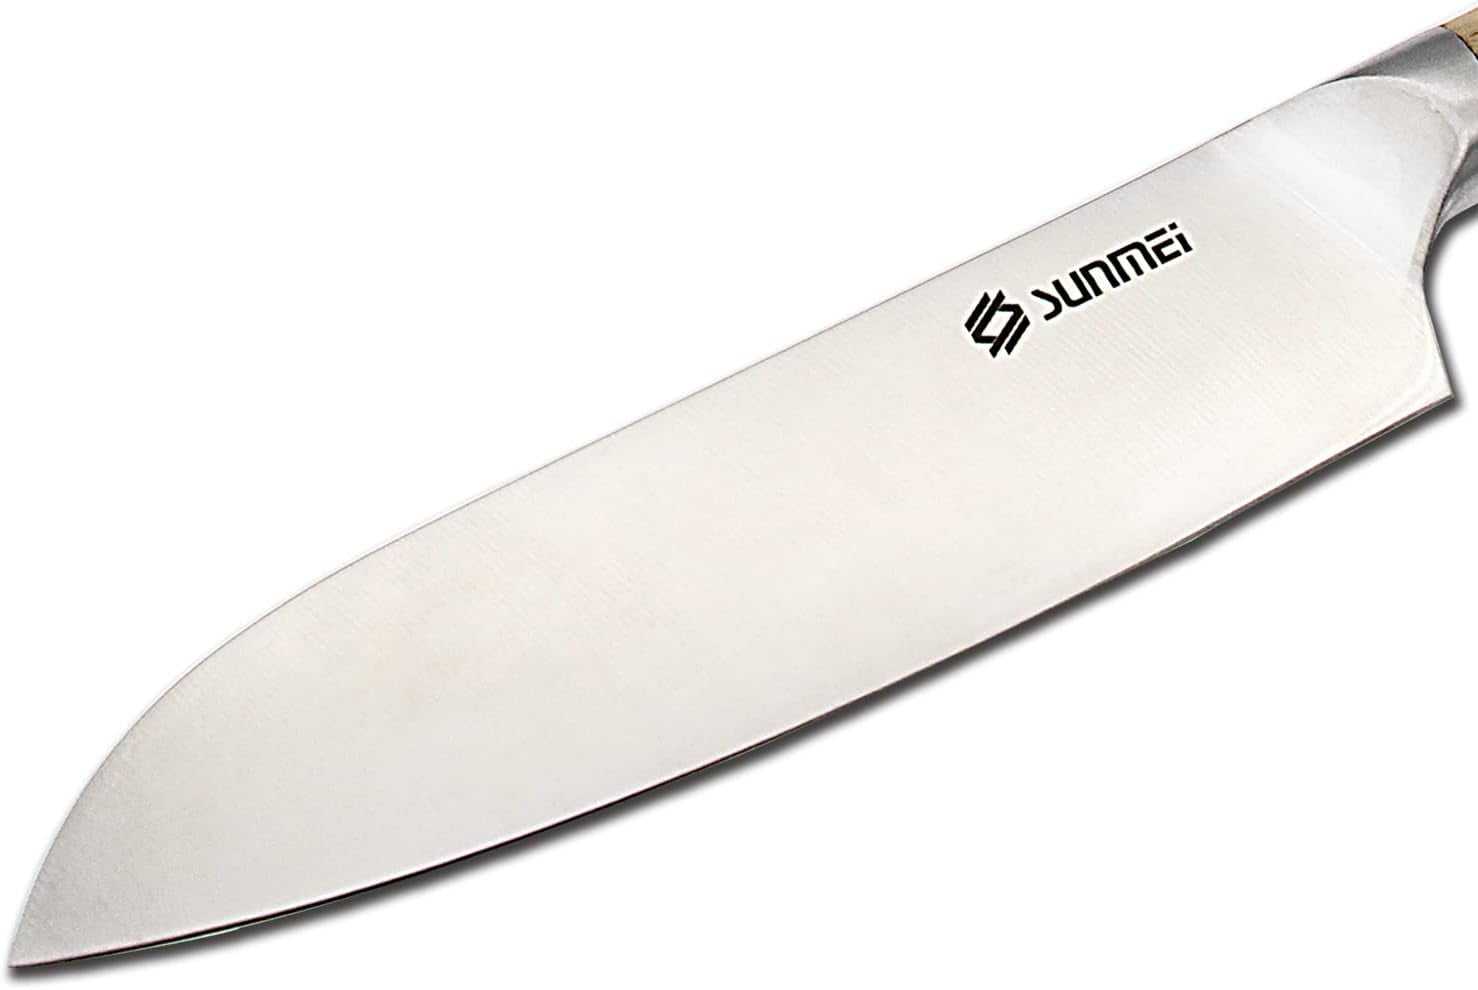 8 Inch Chef'S Knife Japanese Style Santoku Knife 5Cr15Mov Stainless Steel Kitchen Knives High Carbon Chopping Knife